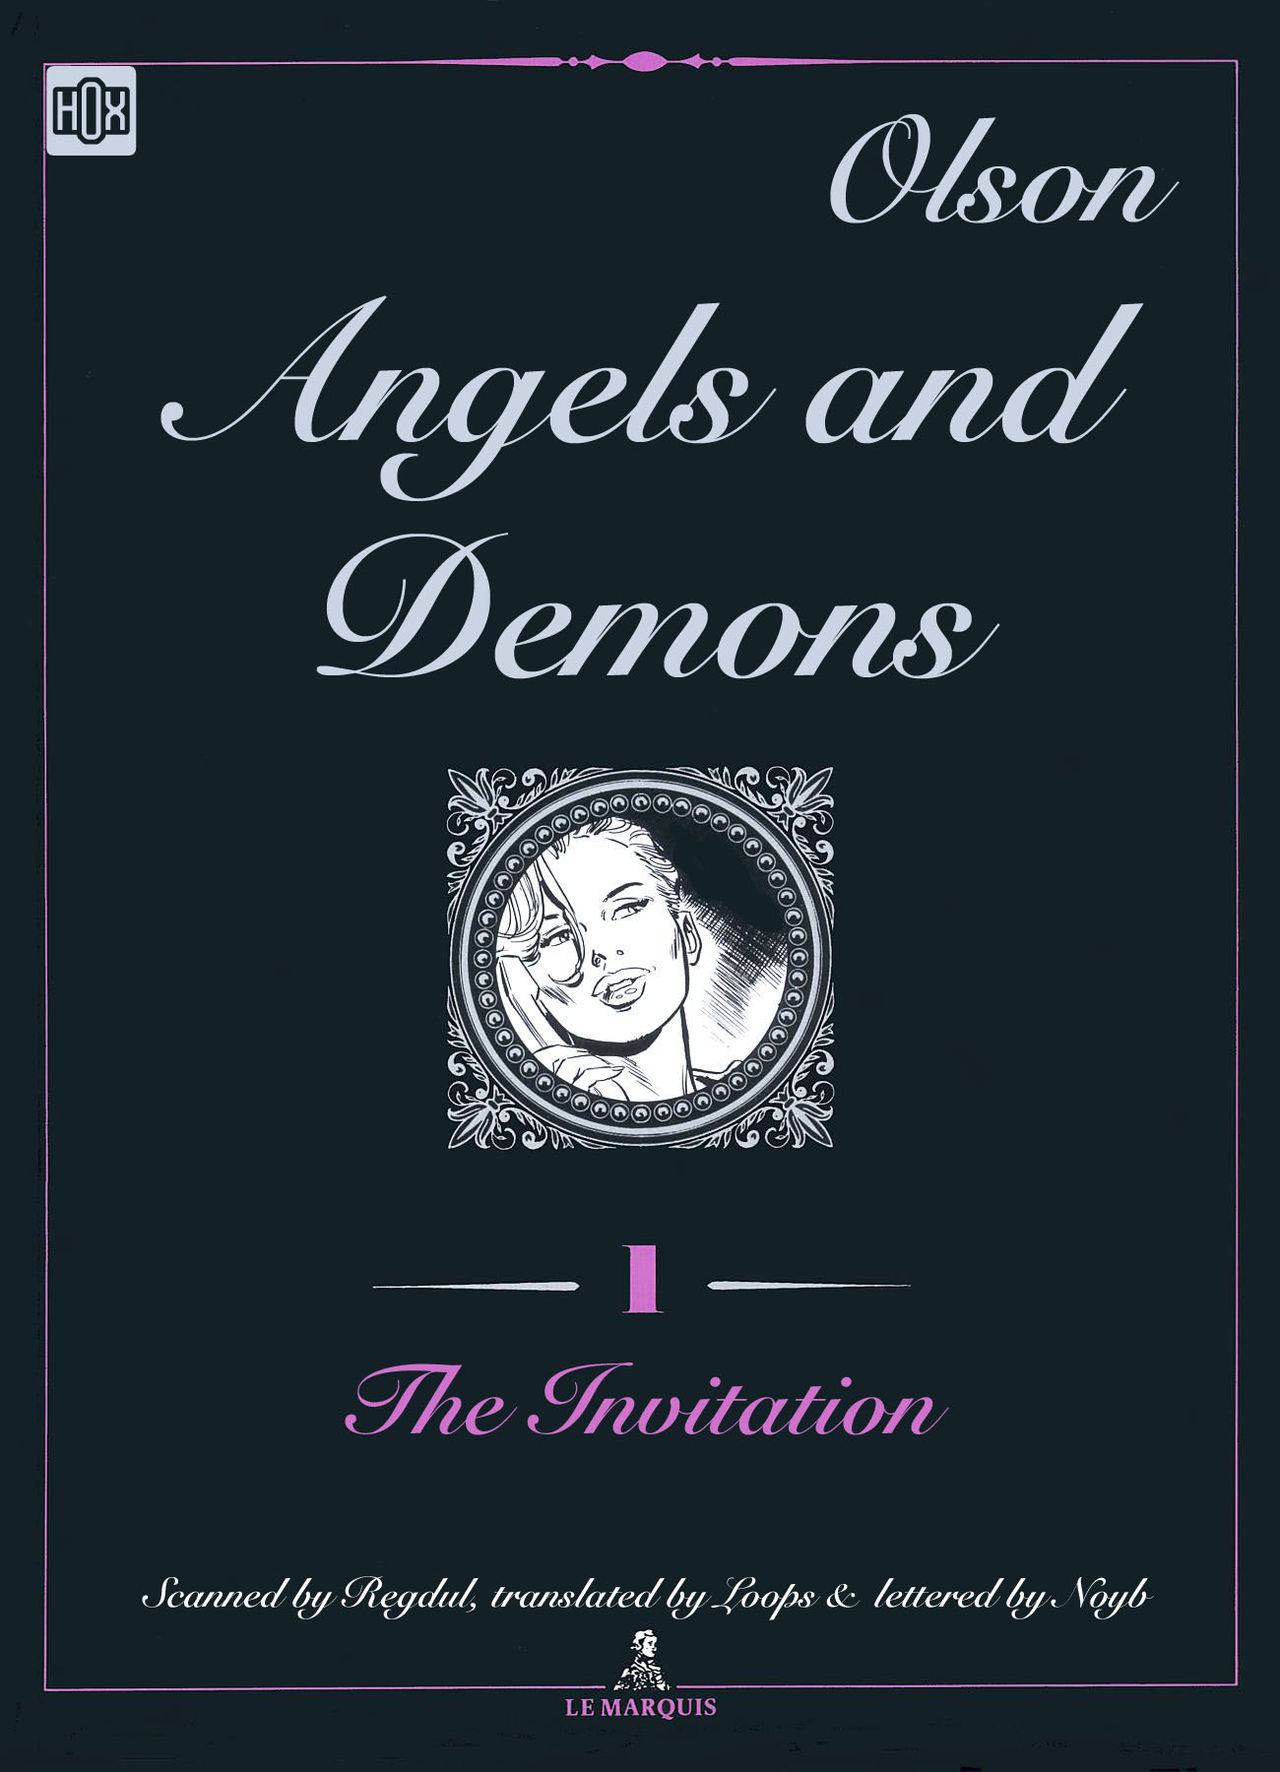 [Olson] Angels and Demons #1: The Initiation [English] {Loops} 